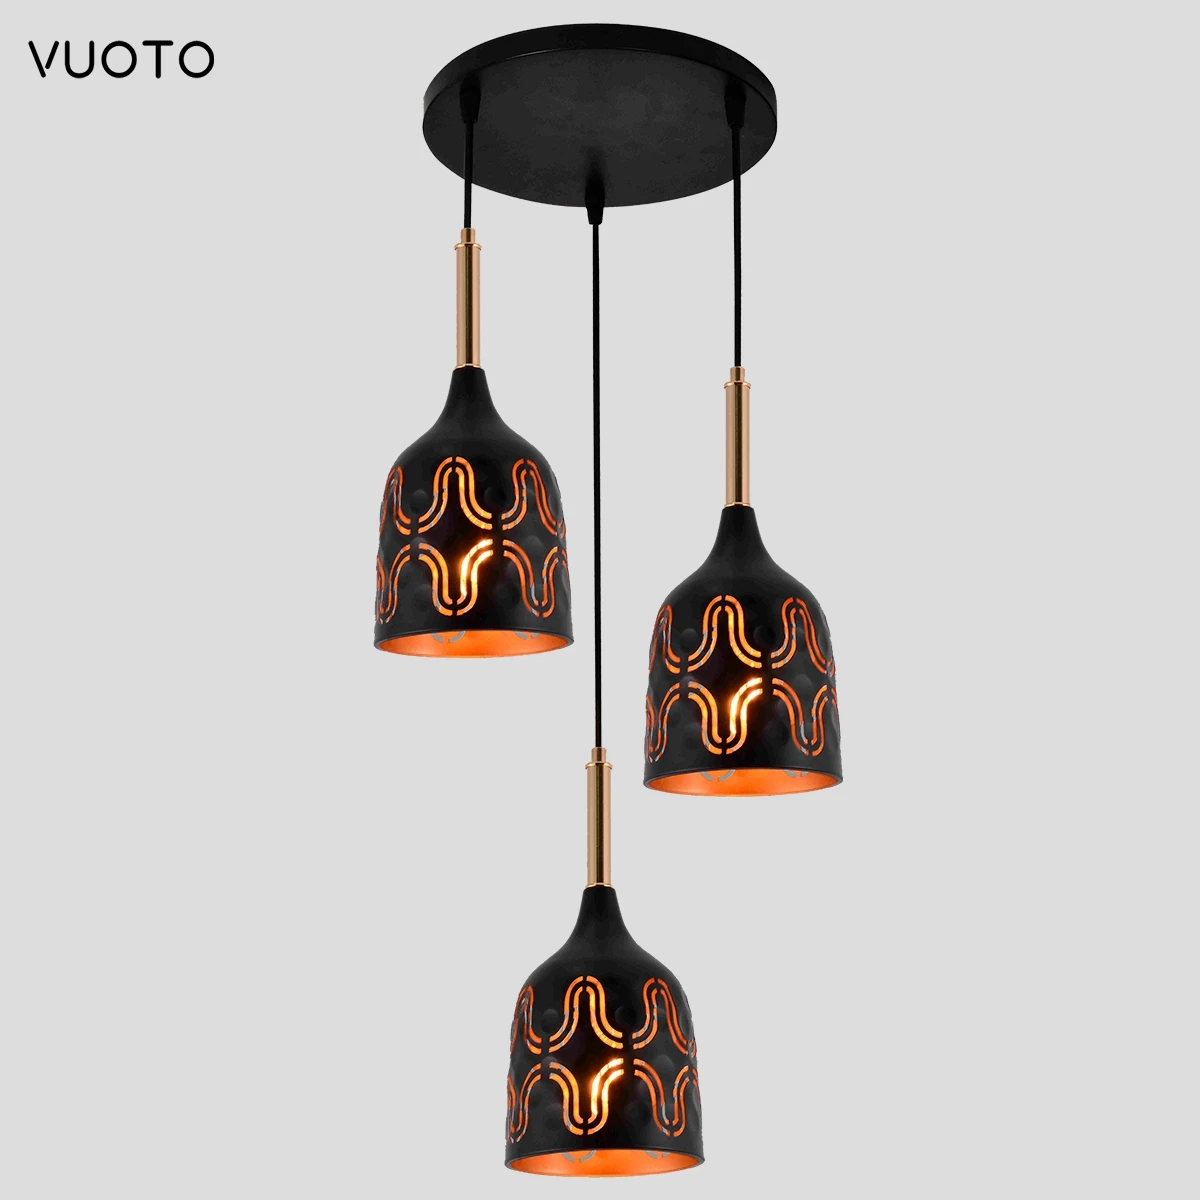 

VUOTO Modern Led Pendant Lights E27 for Kitchen Fixtures Bedroom Table Dining Room Hanging Lamp Lampshade Home Chandelier Black